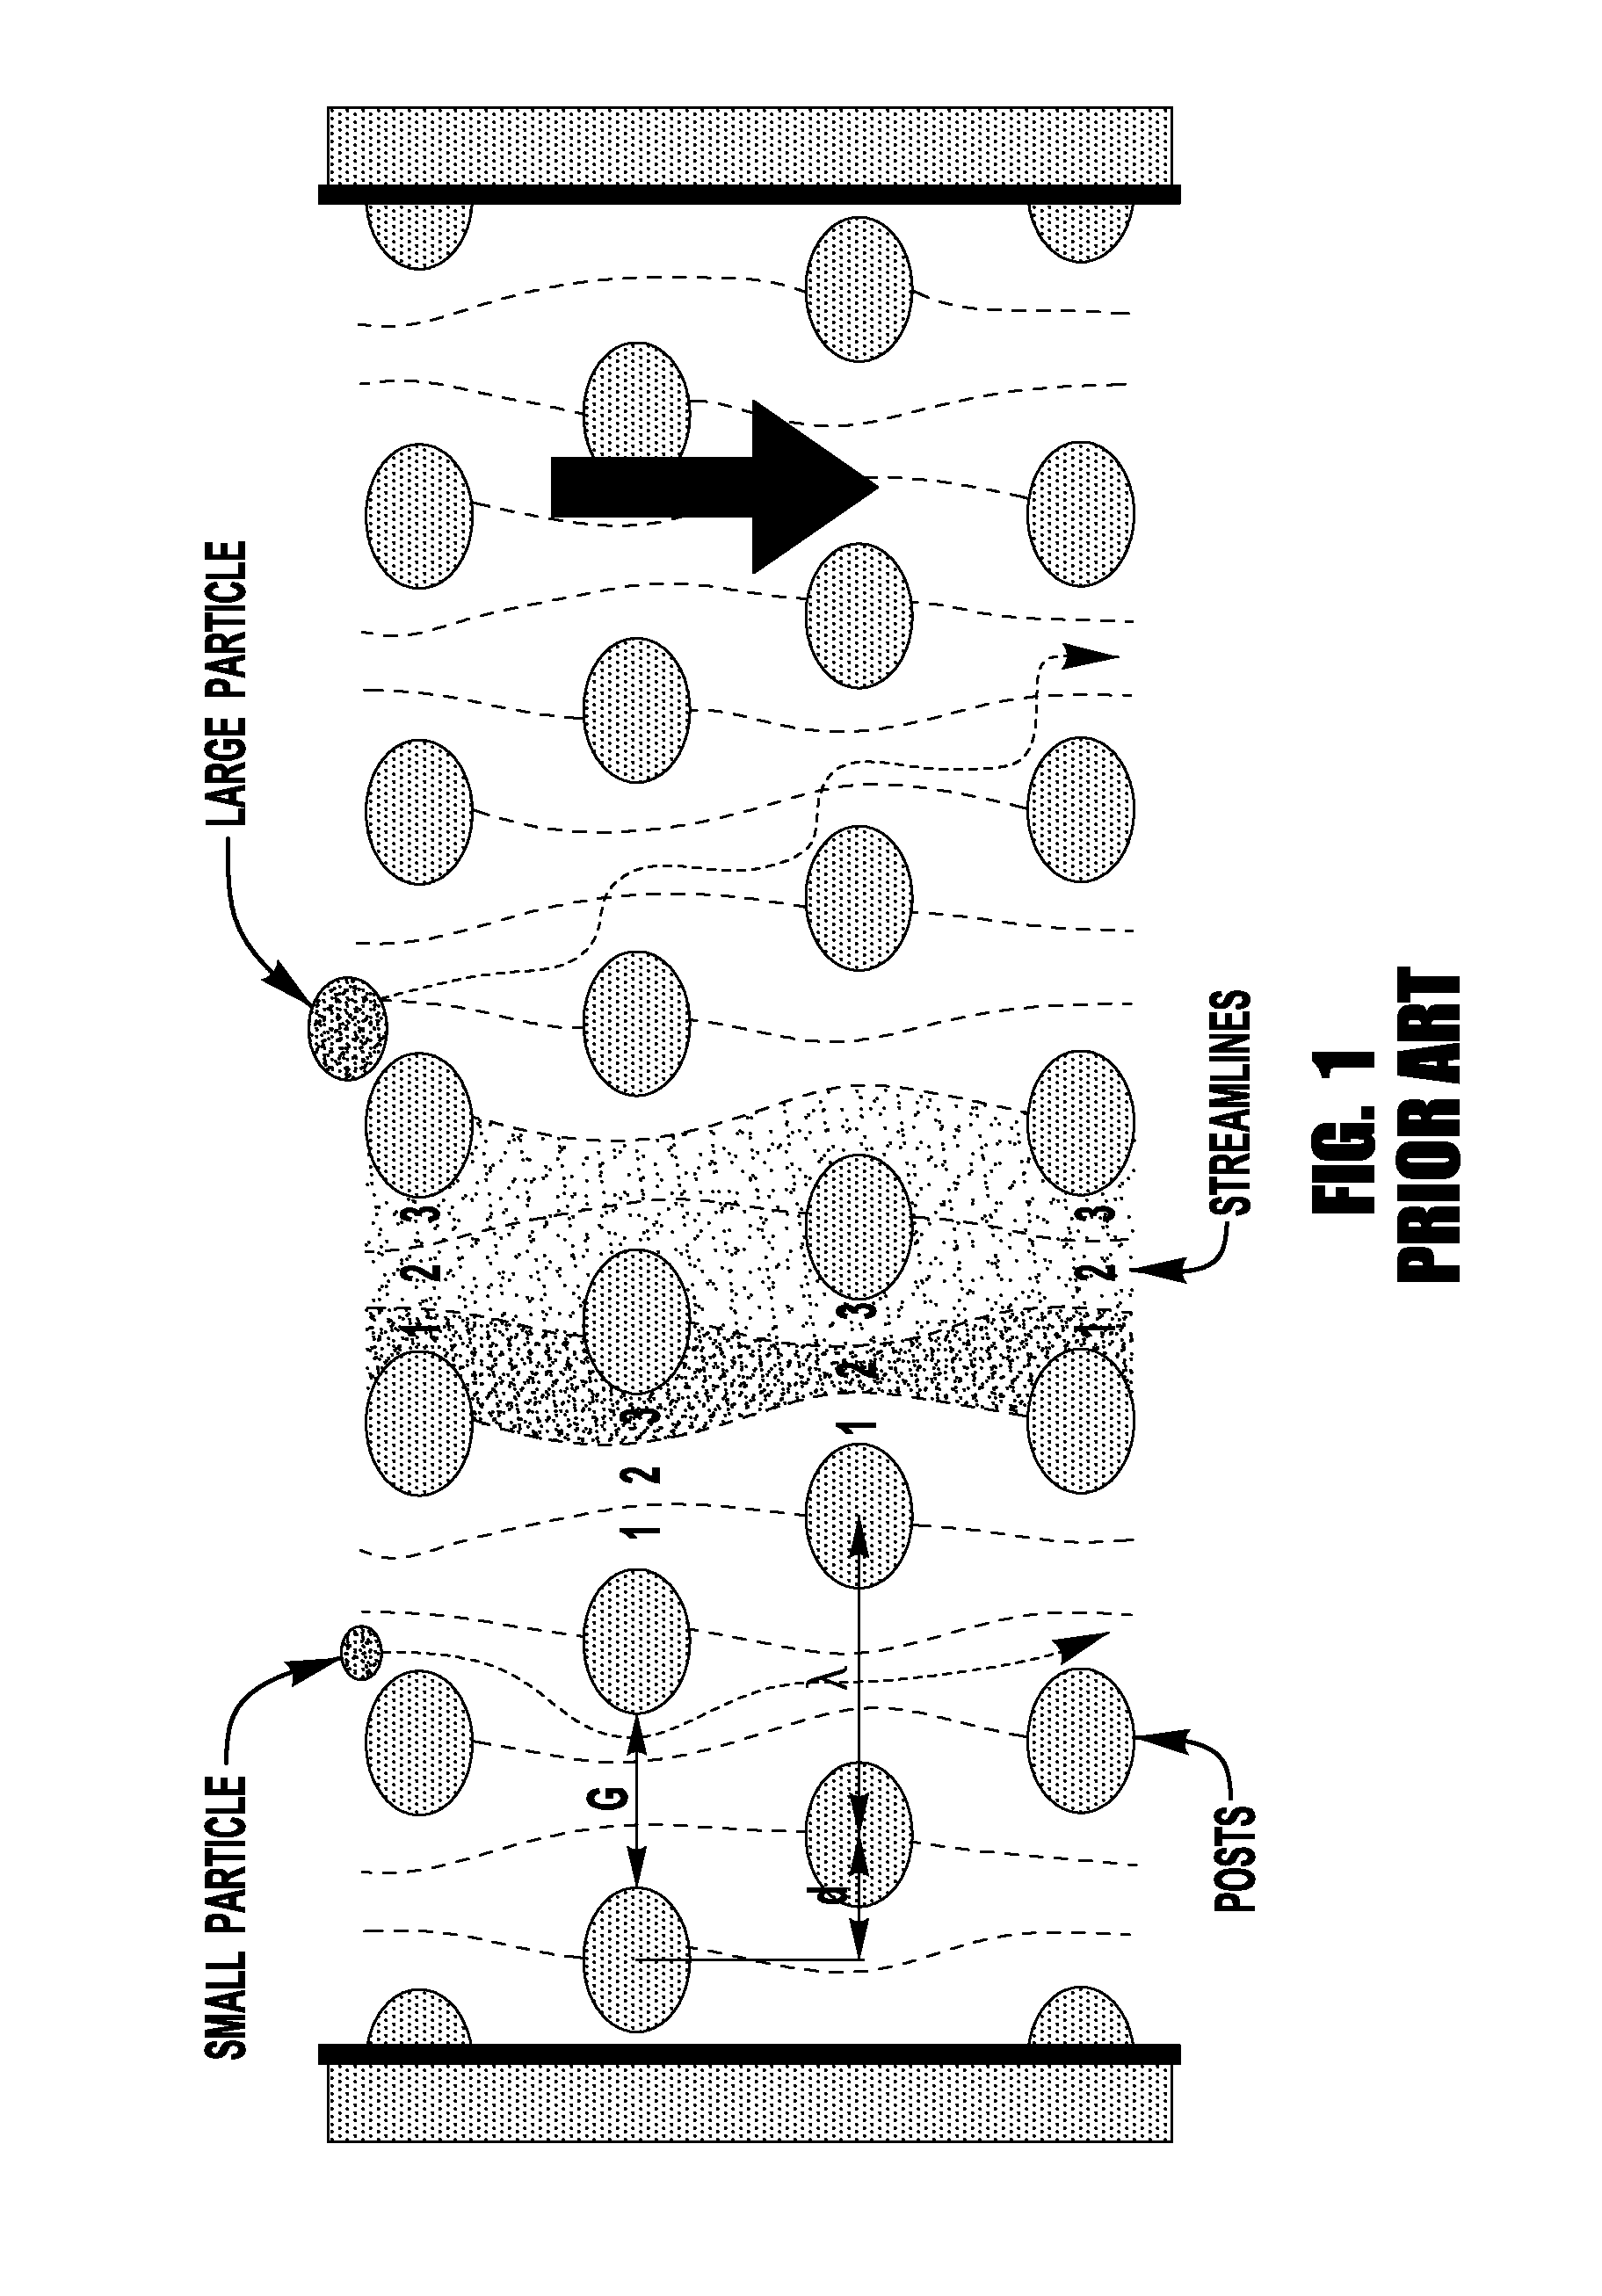 Lateral displacement array for microfiltration